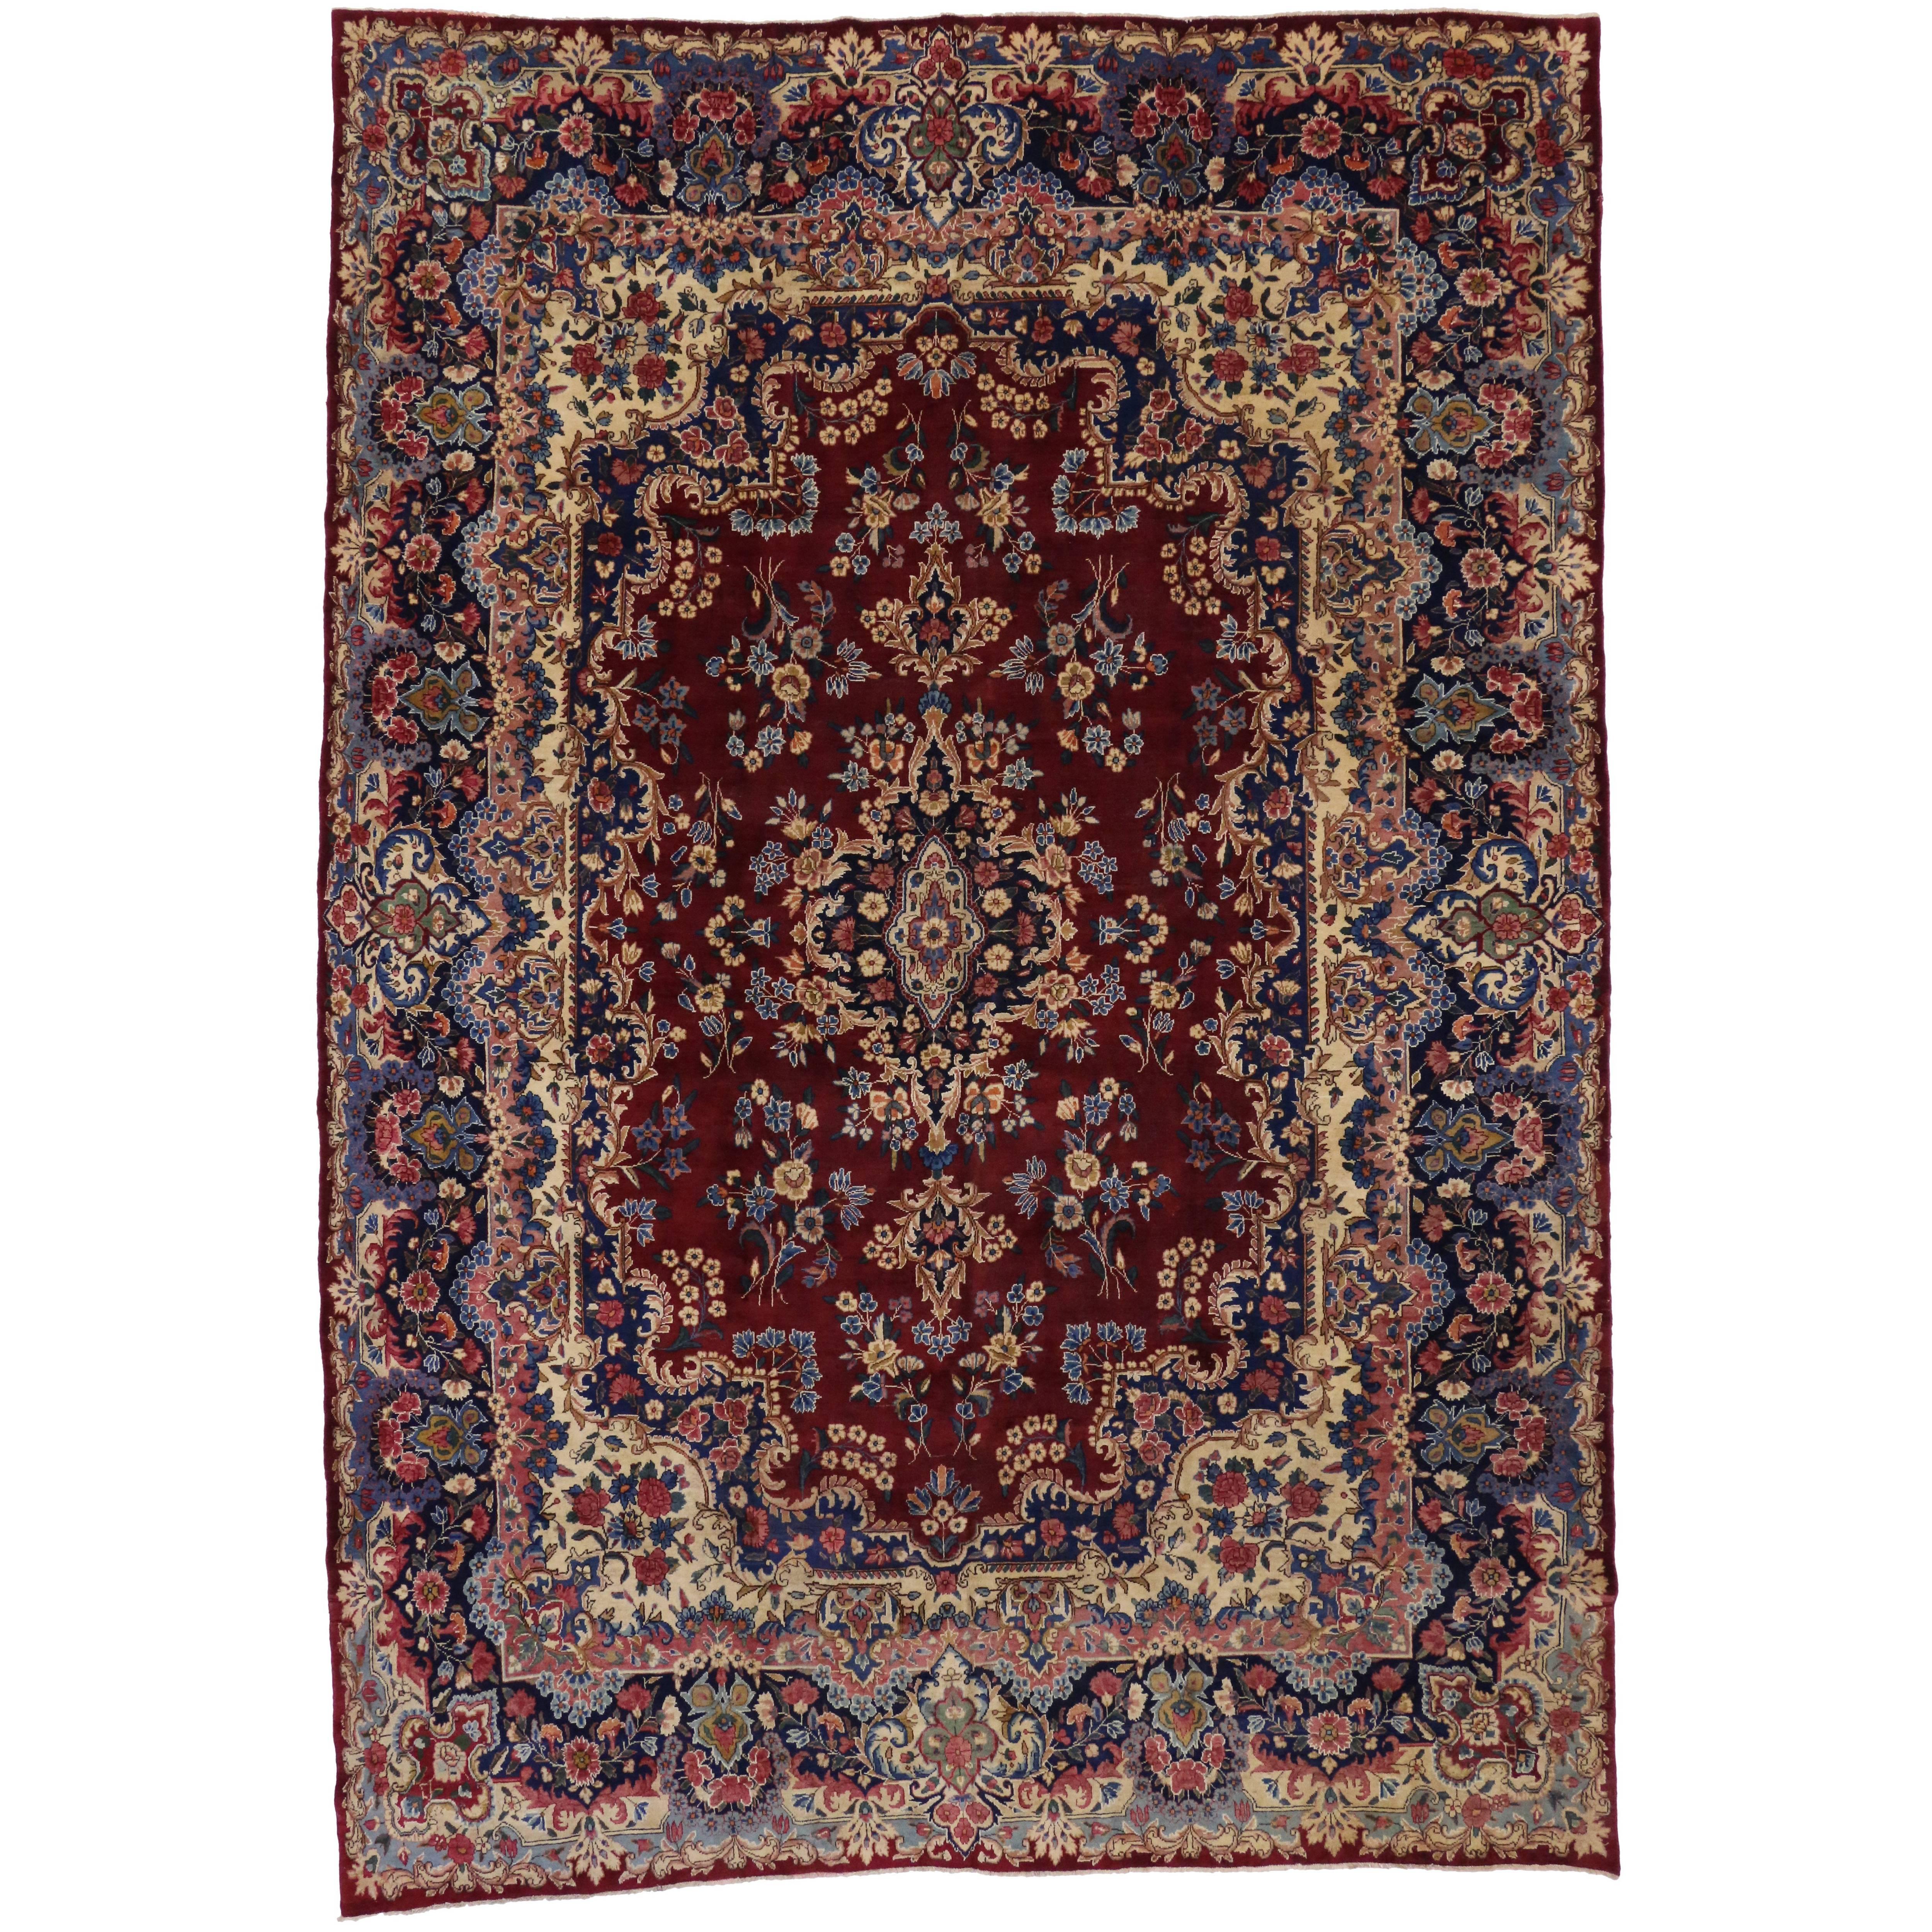 Vintage Persian Yazd Rug with Traditional English and Old World Style